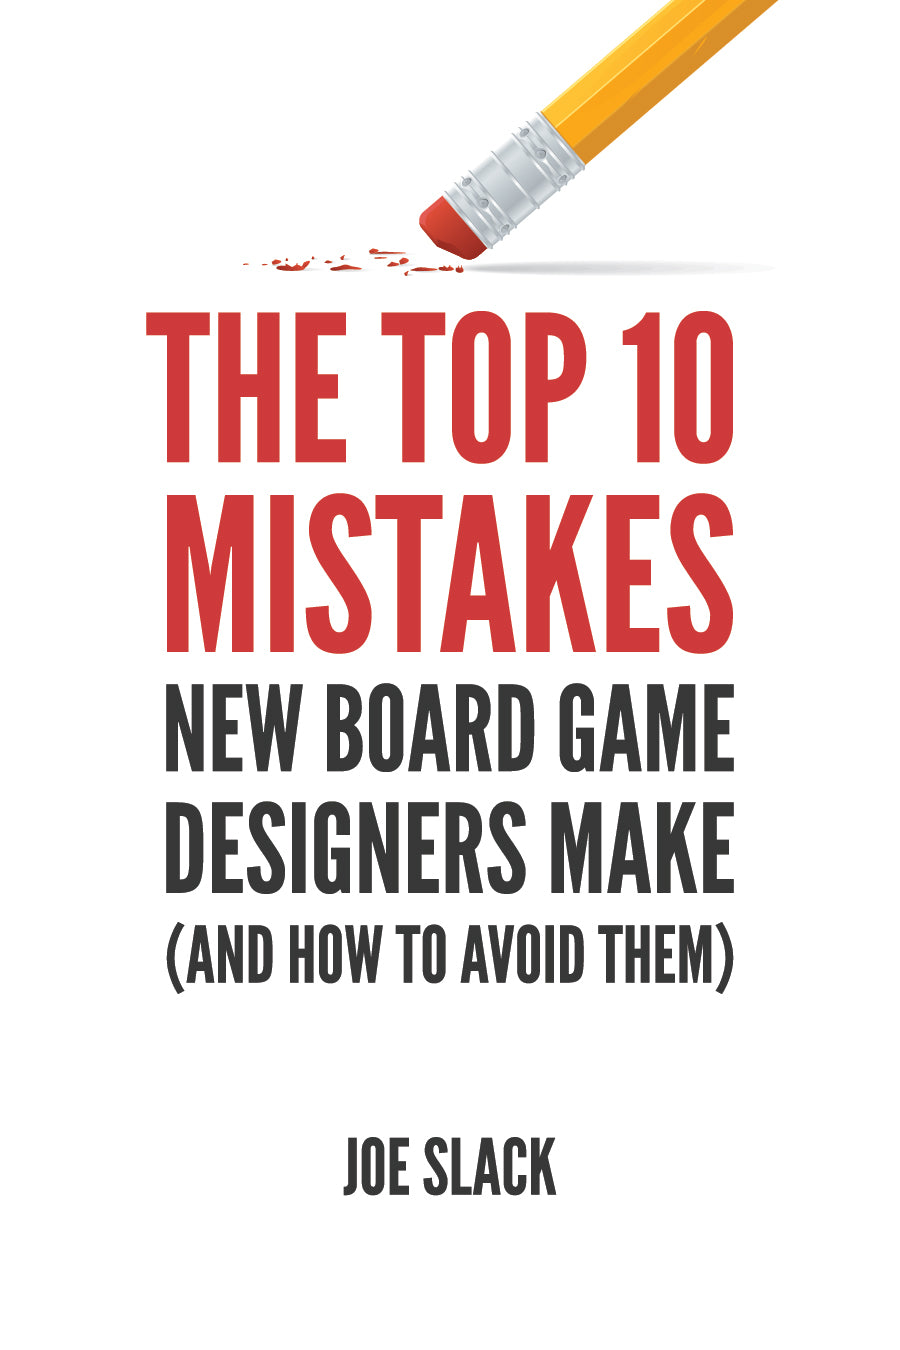 The Top 10 Mistakes New Board Game Designers Make (and How to Avoid Them) ebook